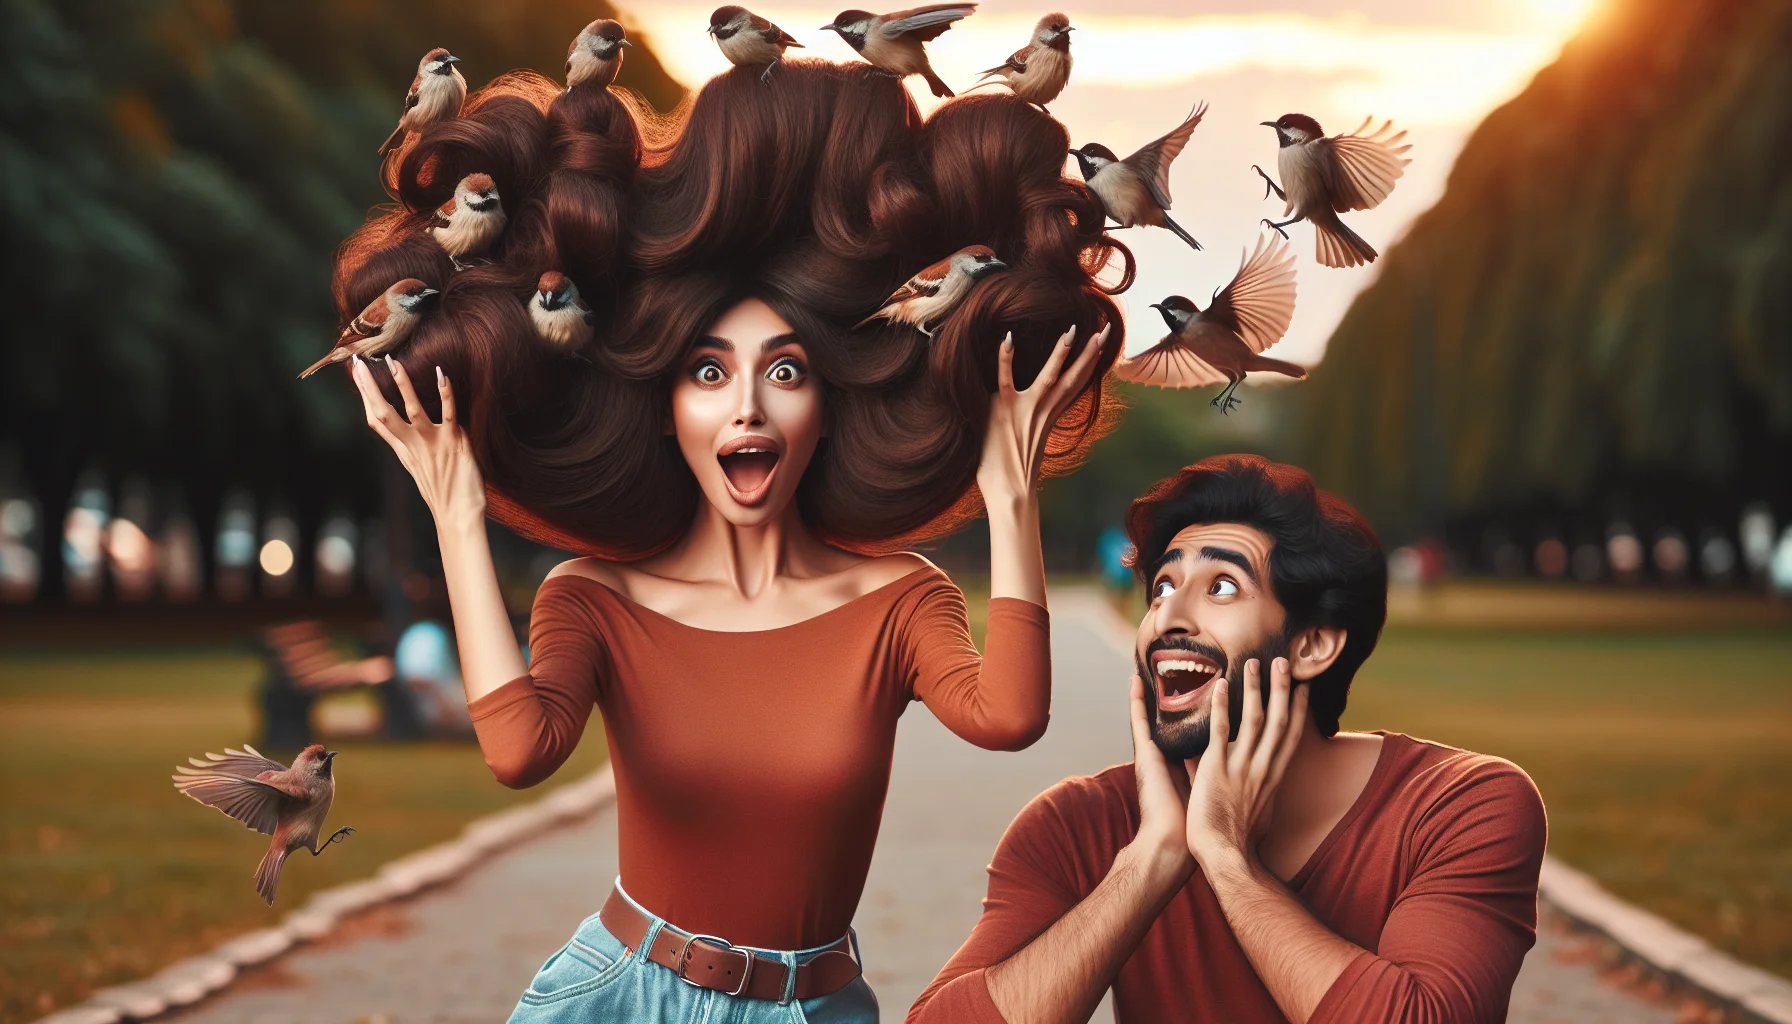 Create a lively and humorous scene of a park, where a Middle-Eastern woman with dramatic, voluminous, dark mocha brown hair amusingly finds her hair forming a stronghold for playful birds. Briefly distracted from feeding the birds in her hands, she exhibits a delightfully surprised expression to a passerby, a South Asian man, who is struggling to contain his laughter. Note the warm tones of the sunset in the backdrop, casting a gentle glow on the duo and the birds, enhancing the enchanting spectacle. Both persons are casually dressed suggestive of a relaxing day off.